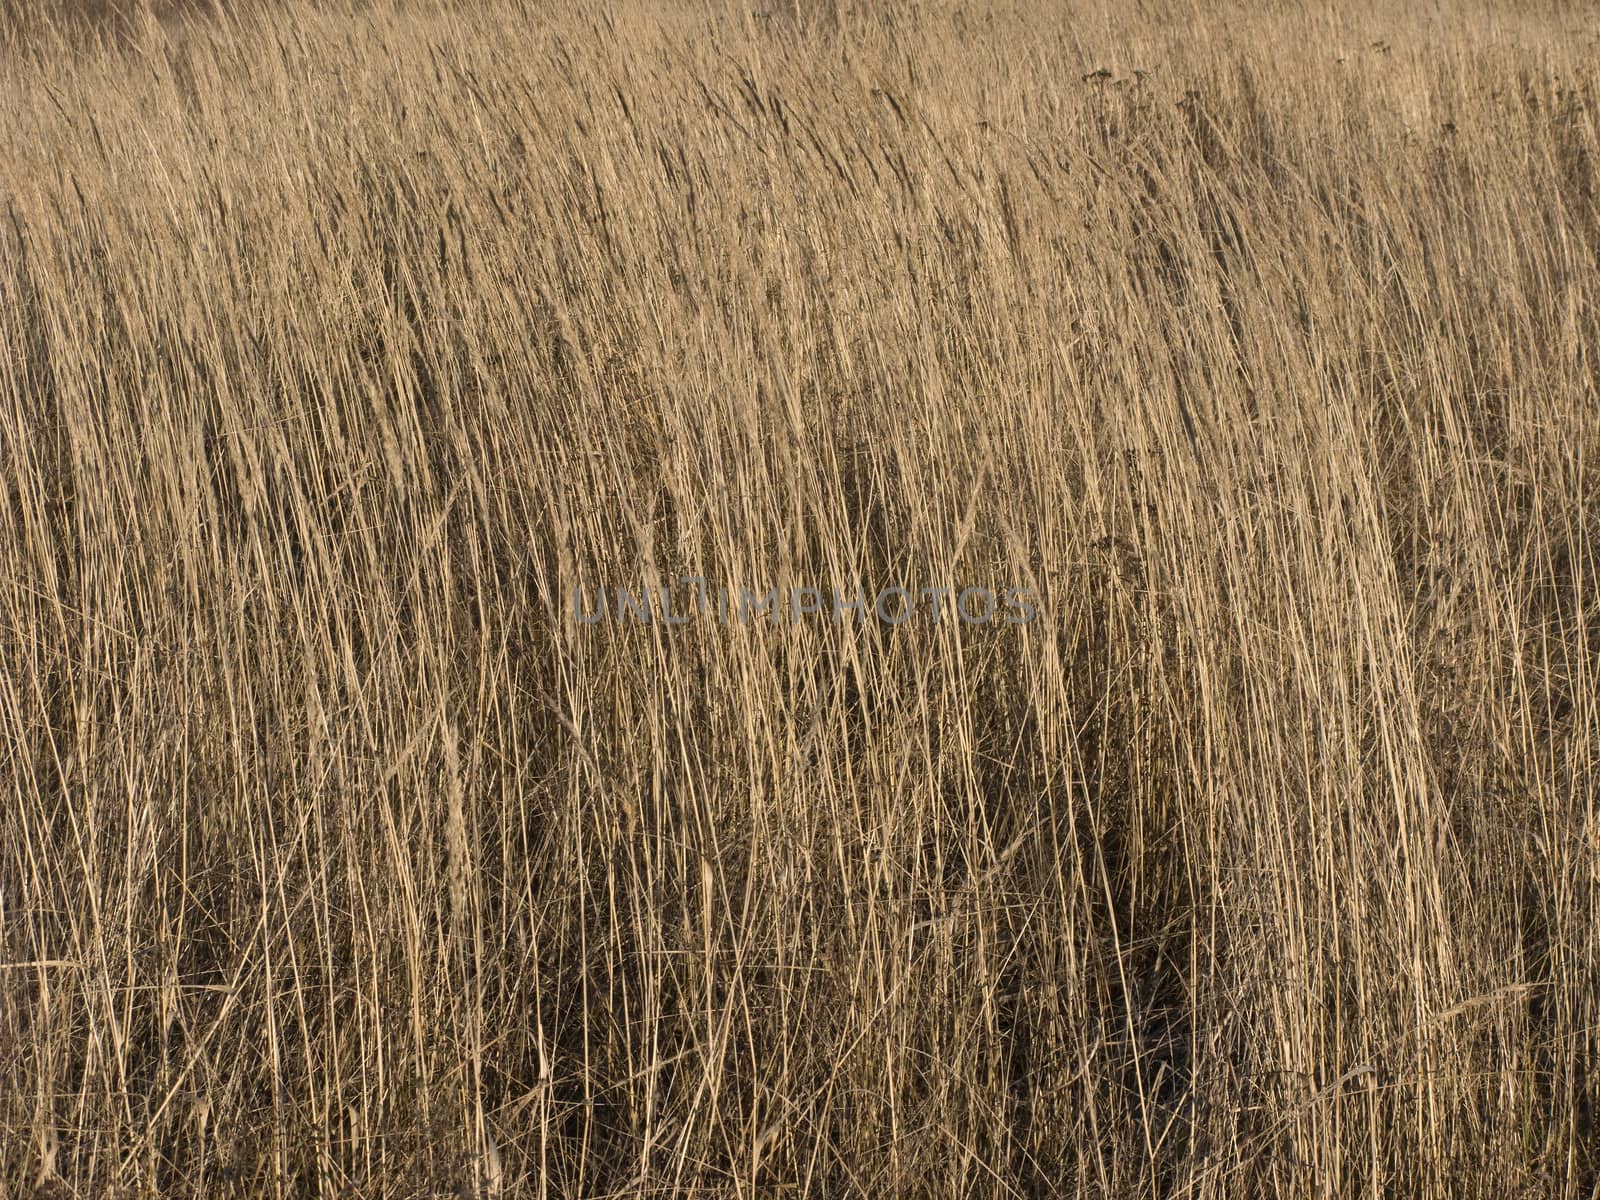 Dry yellow grass background by wander